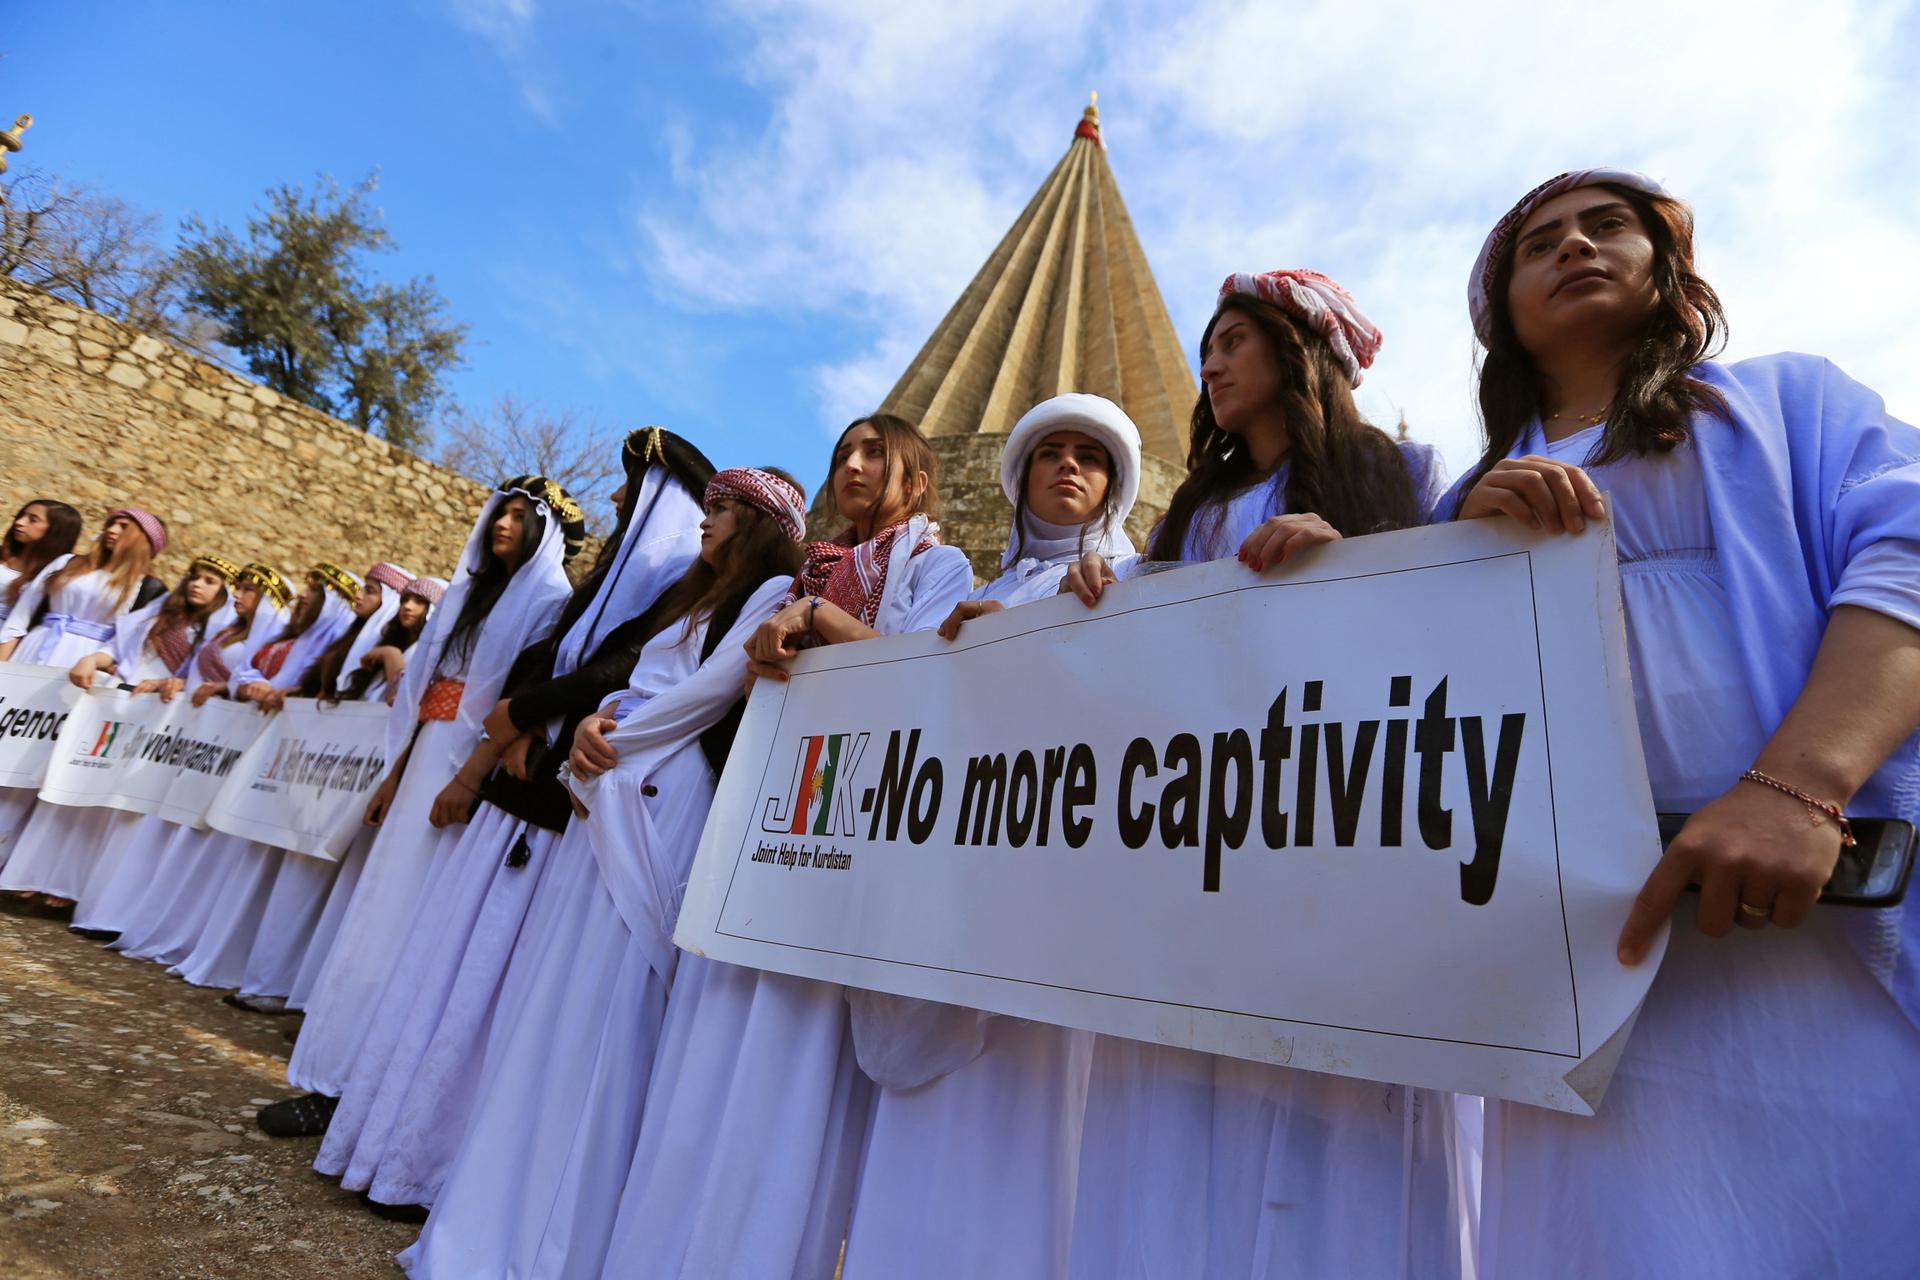 Women in white robes and turbans carry sign that says "no more captivity." 